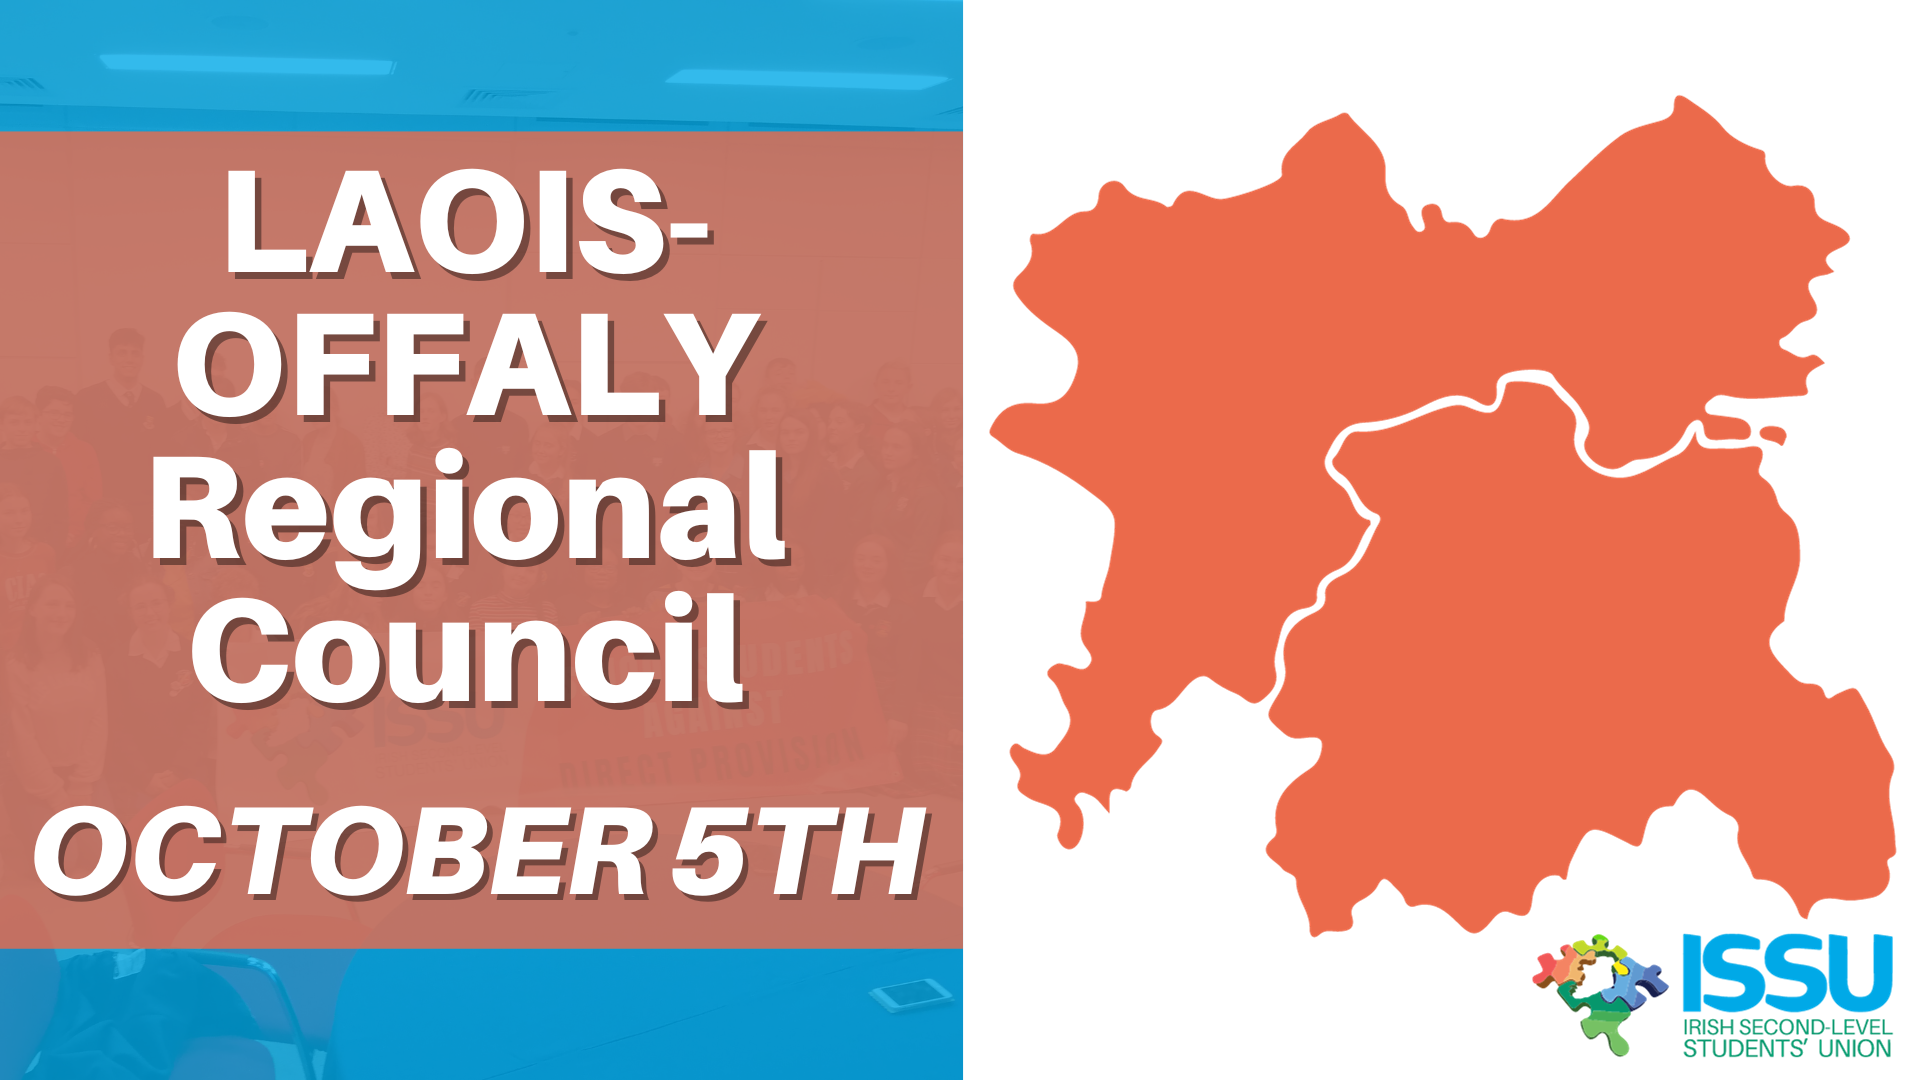 23 Laois - Offaly Regional Council.png